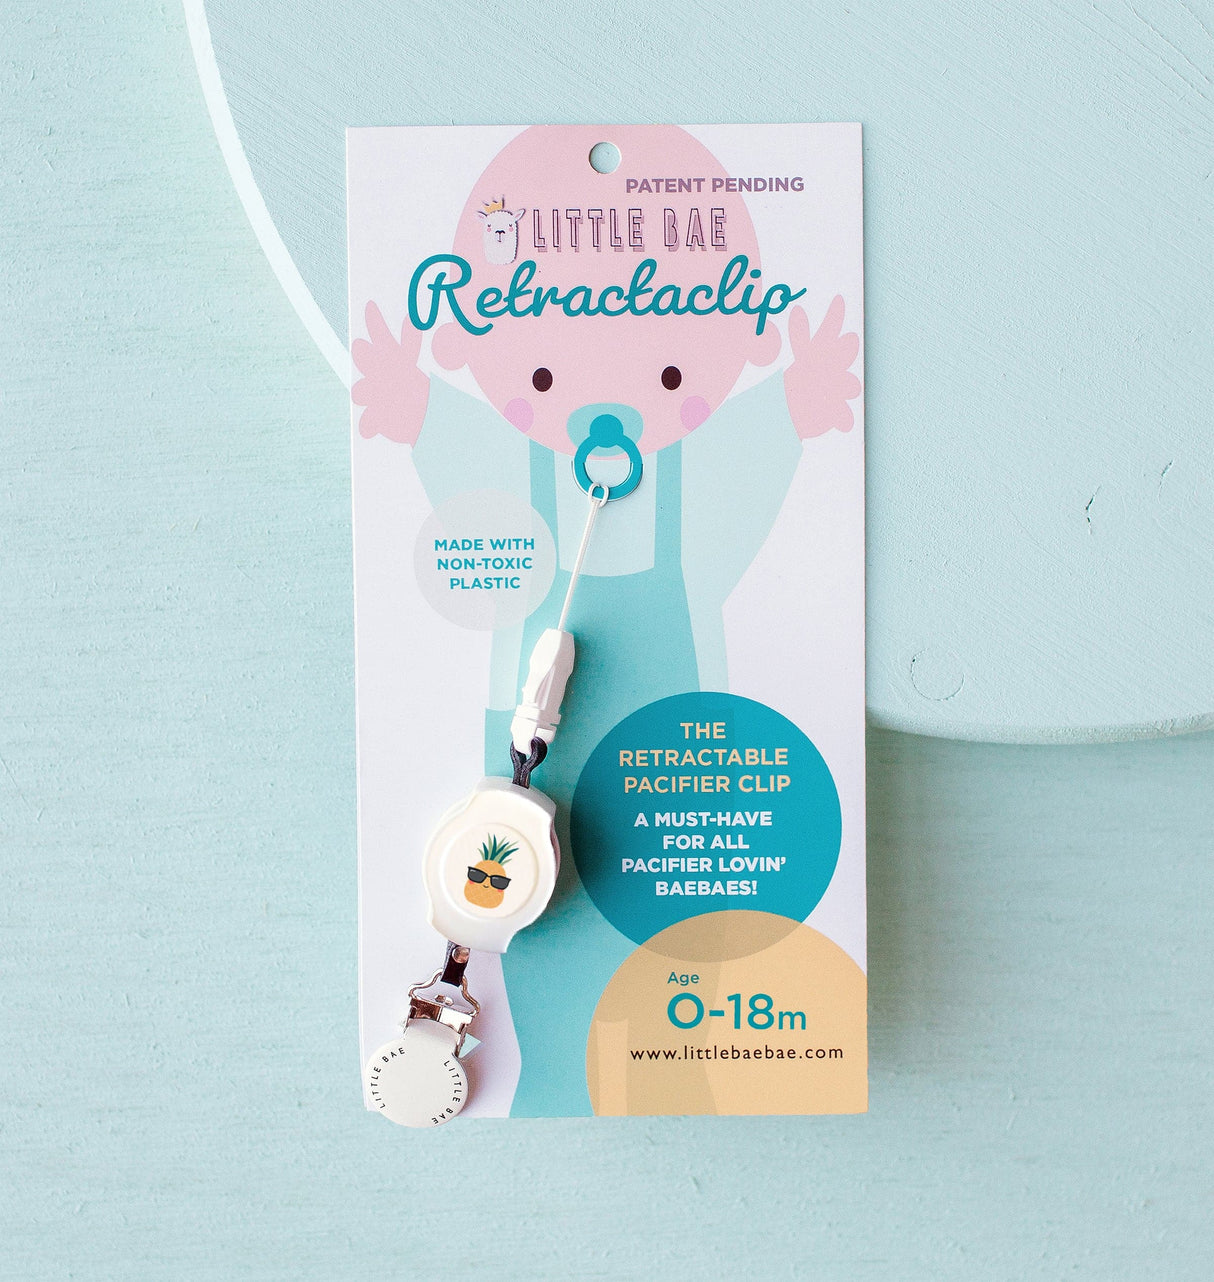 Limited Edition SUMMER RetractaClips 4.0 (Retractable Pacifier Clip) by Little BaeBae